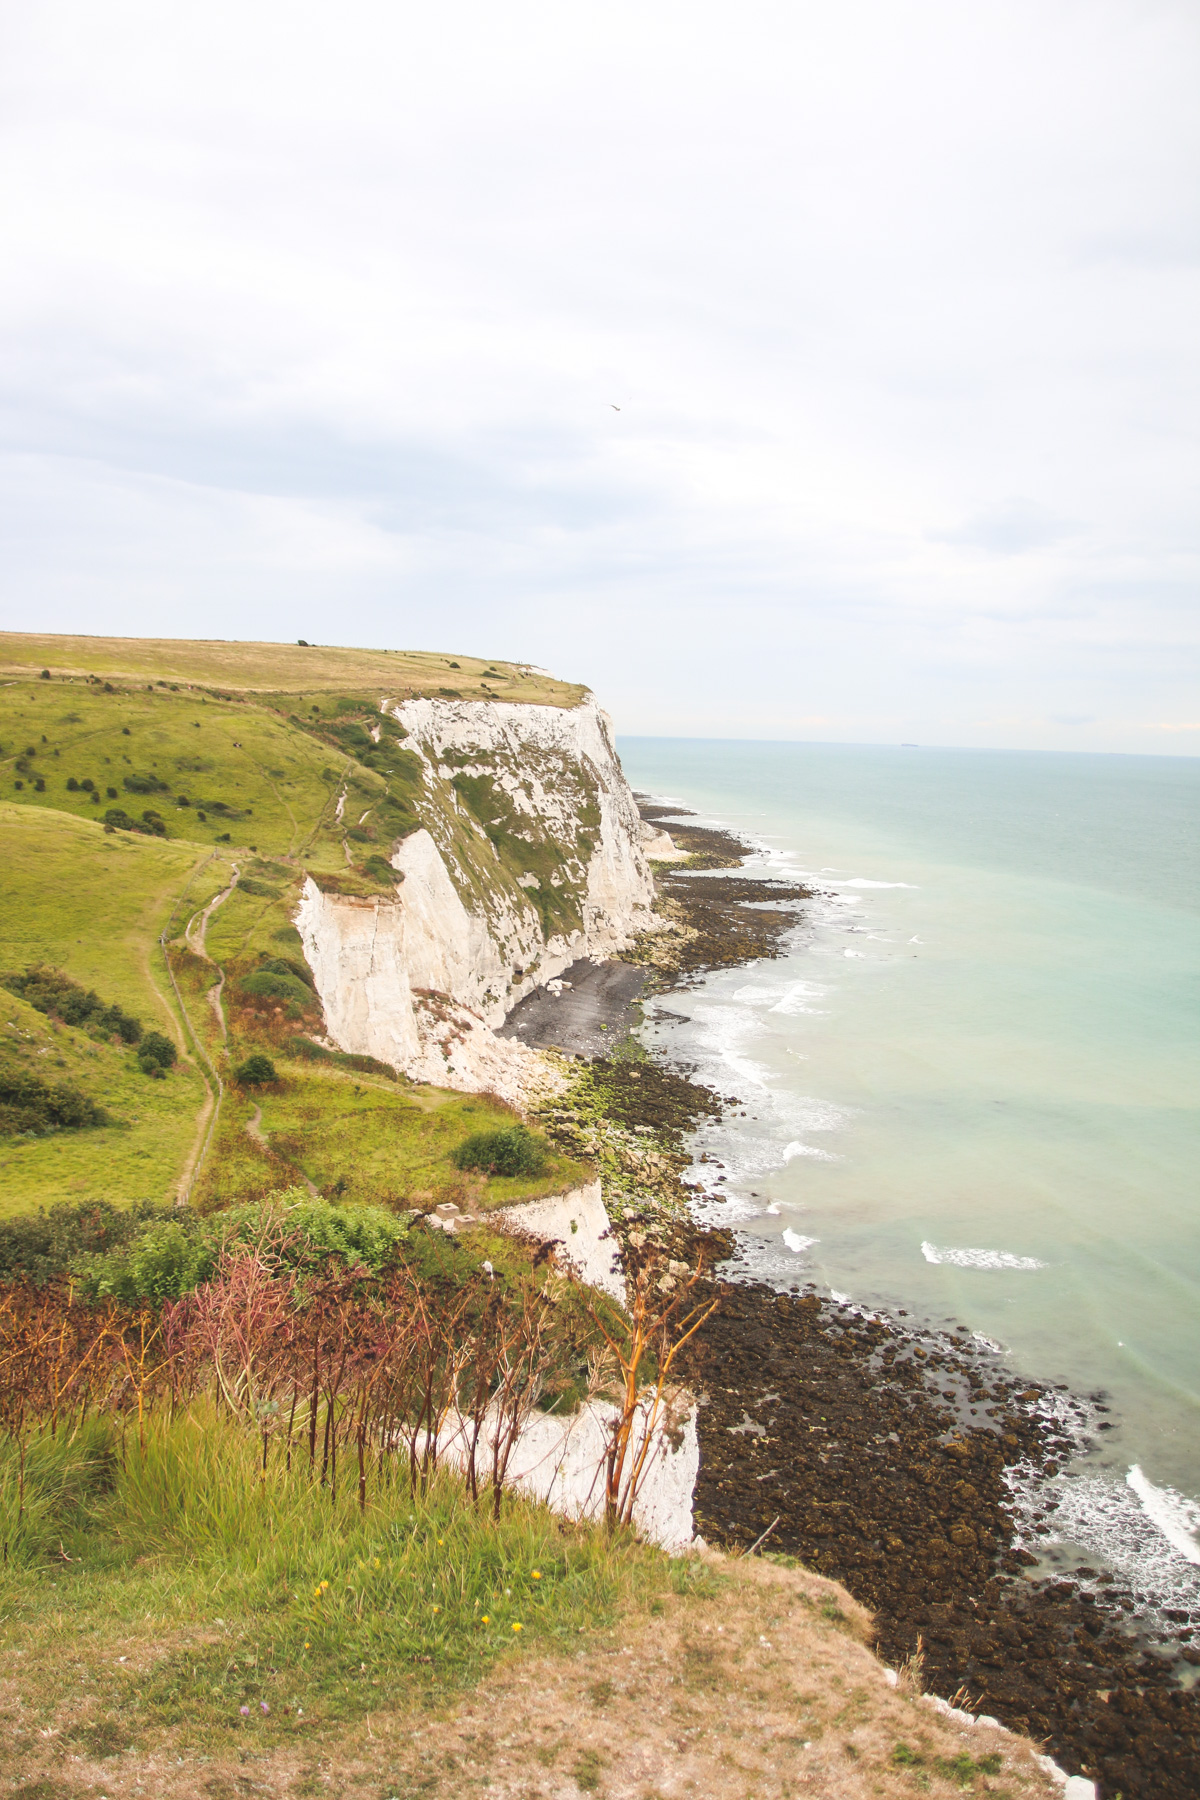 Views over the White Cliffs of Dover